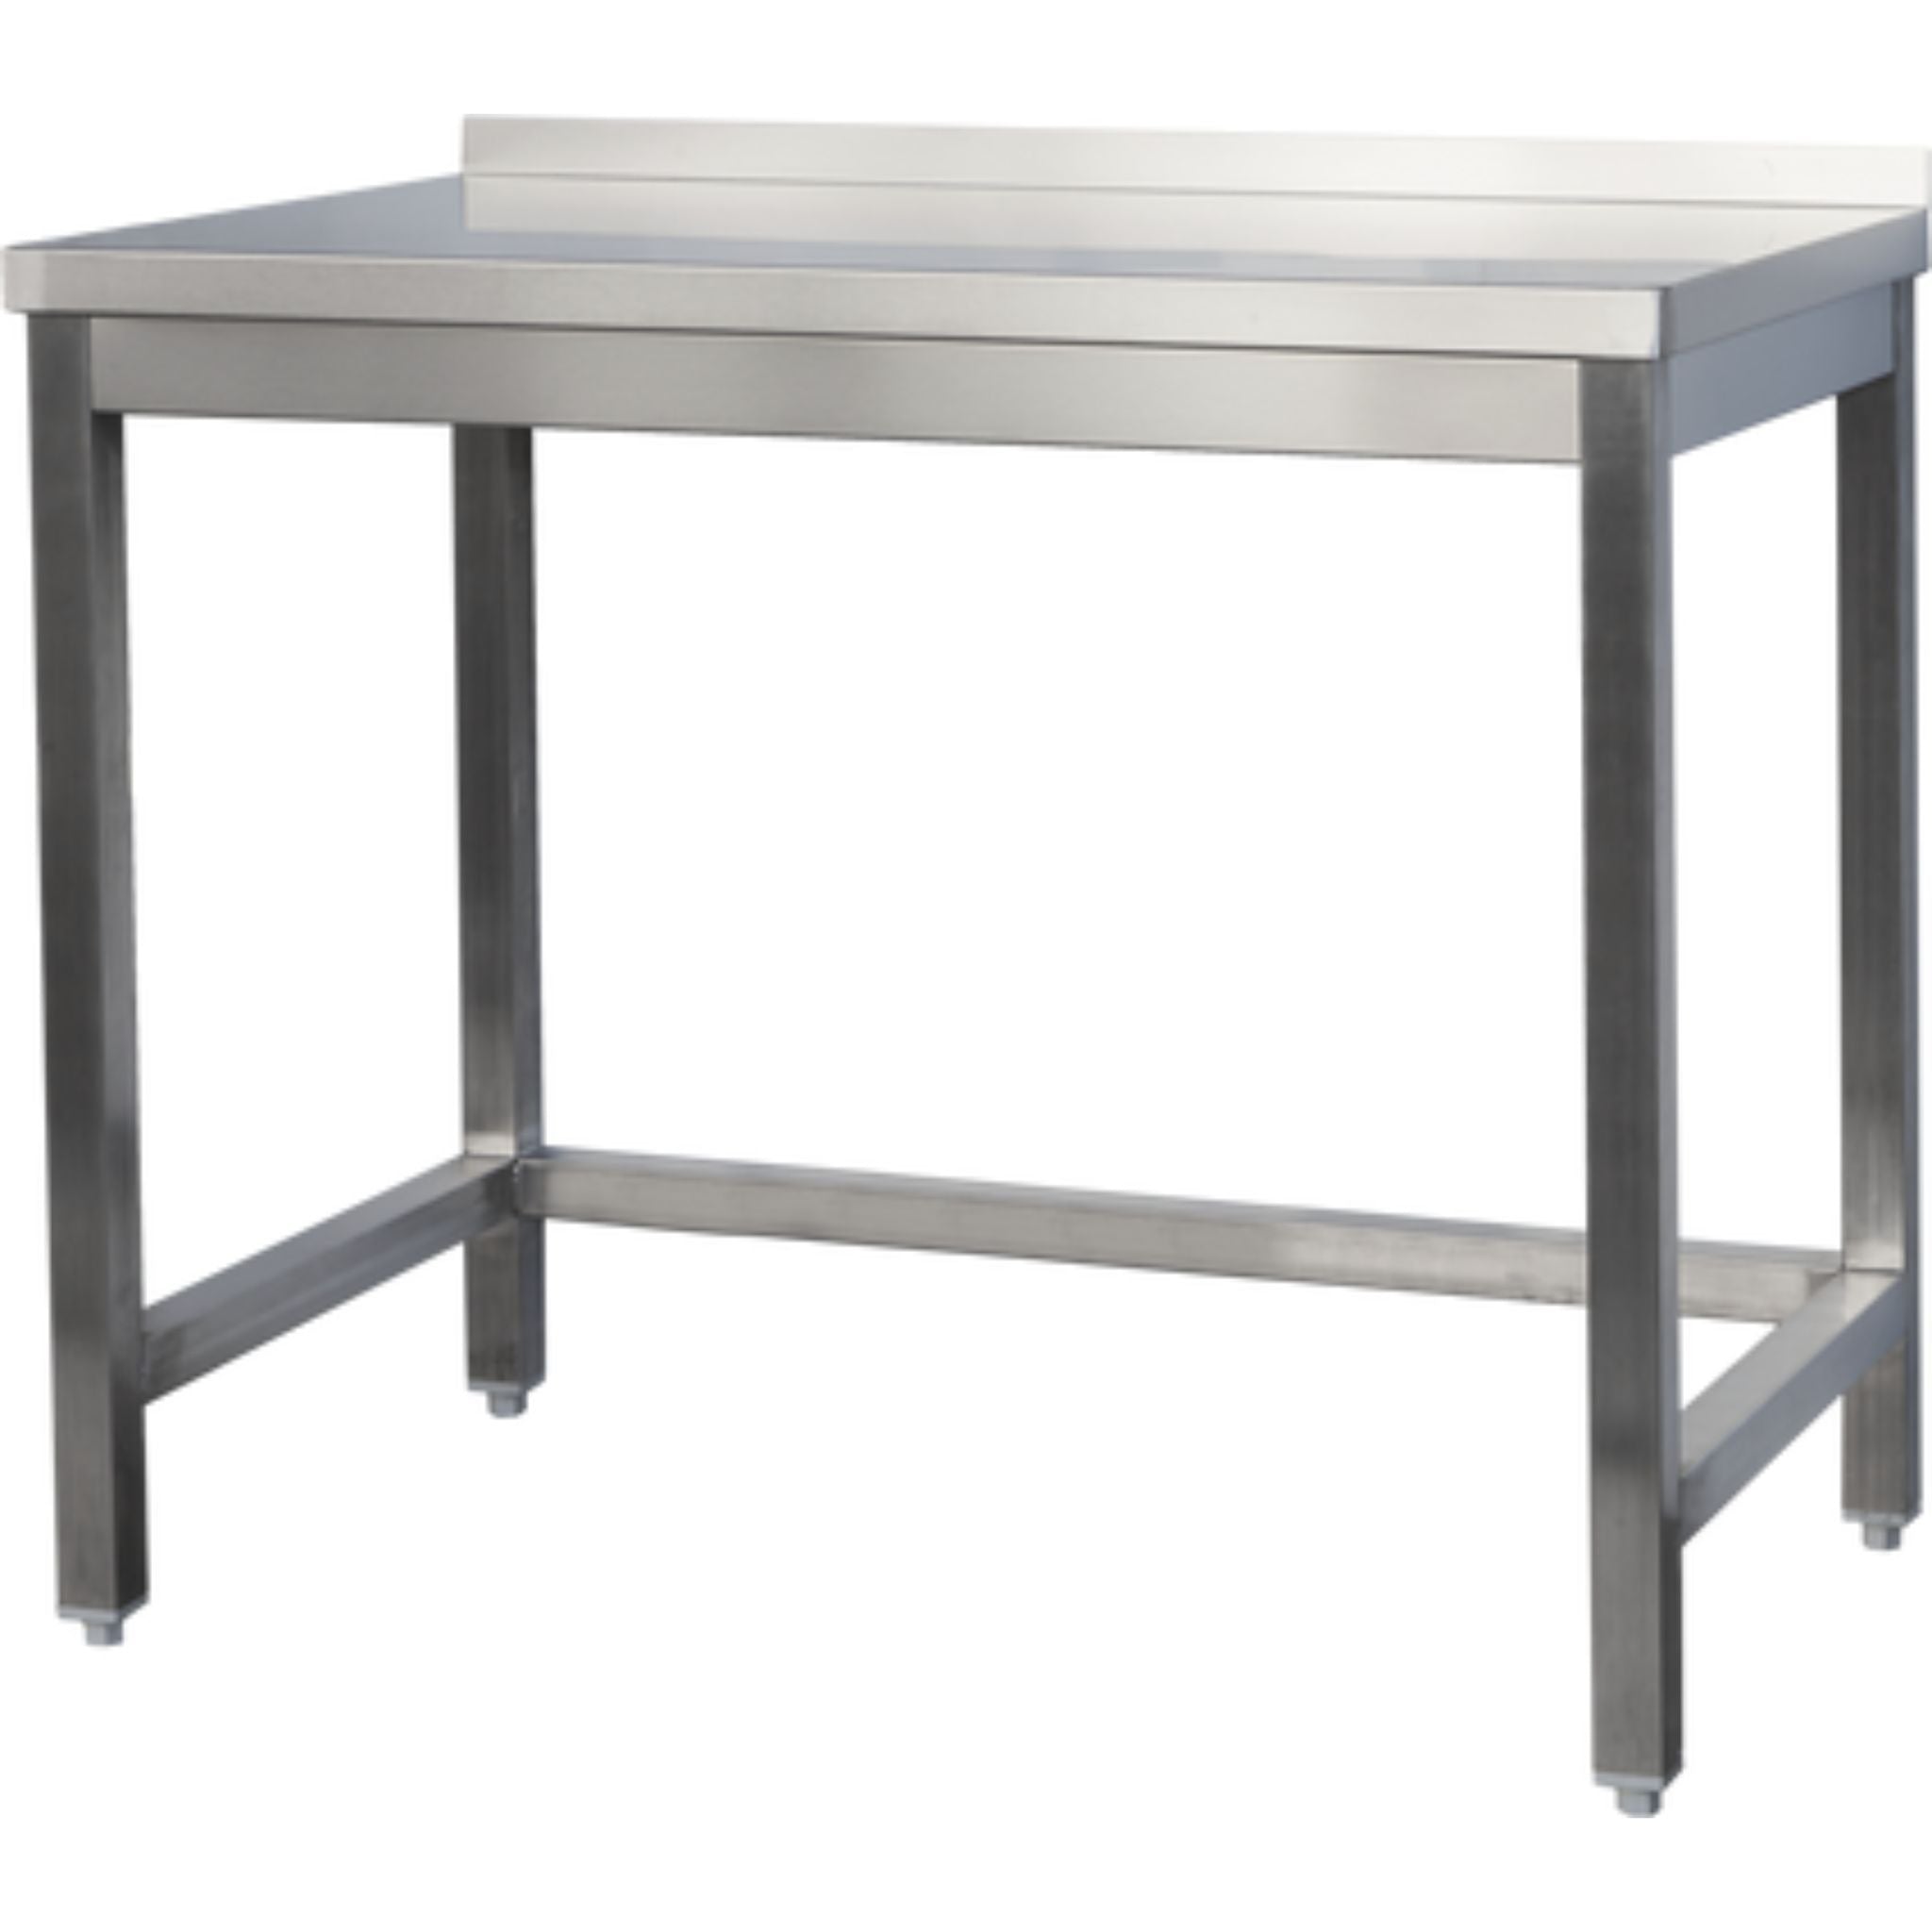 Stainless steel worktable Professional without base shelf with upstand